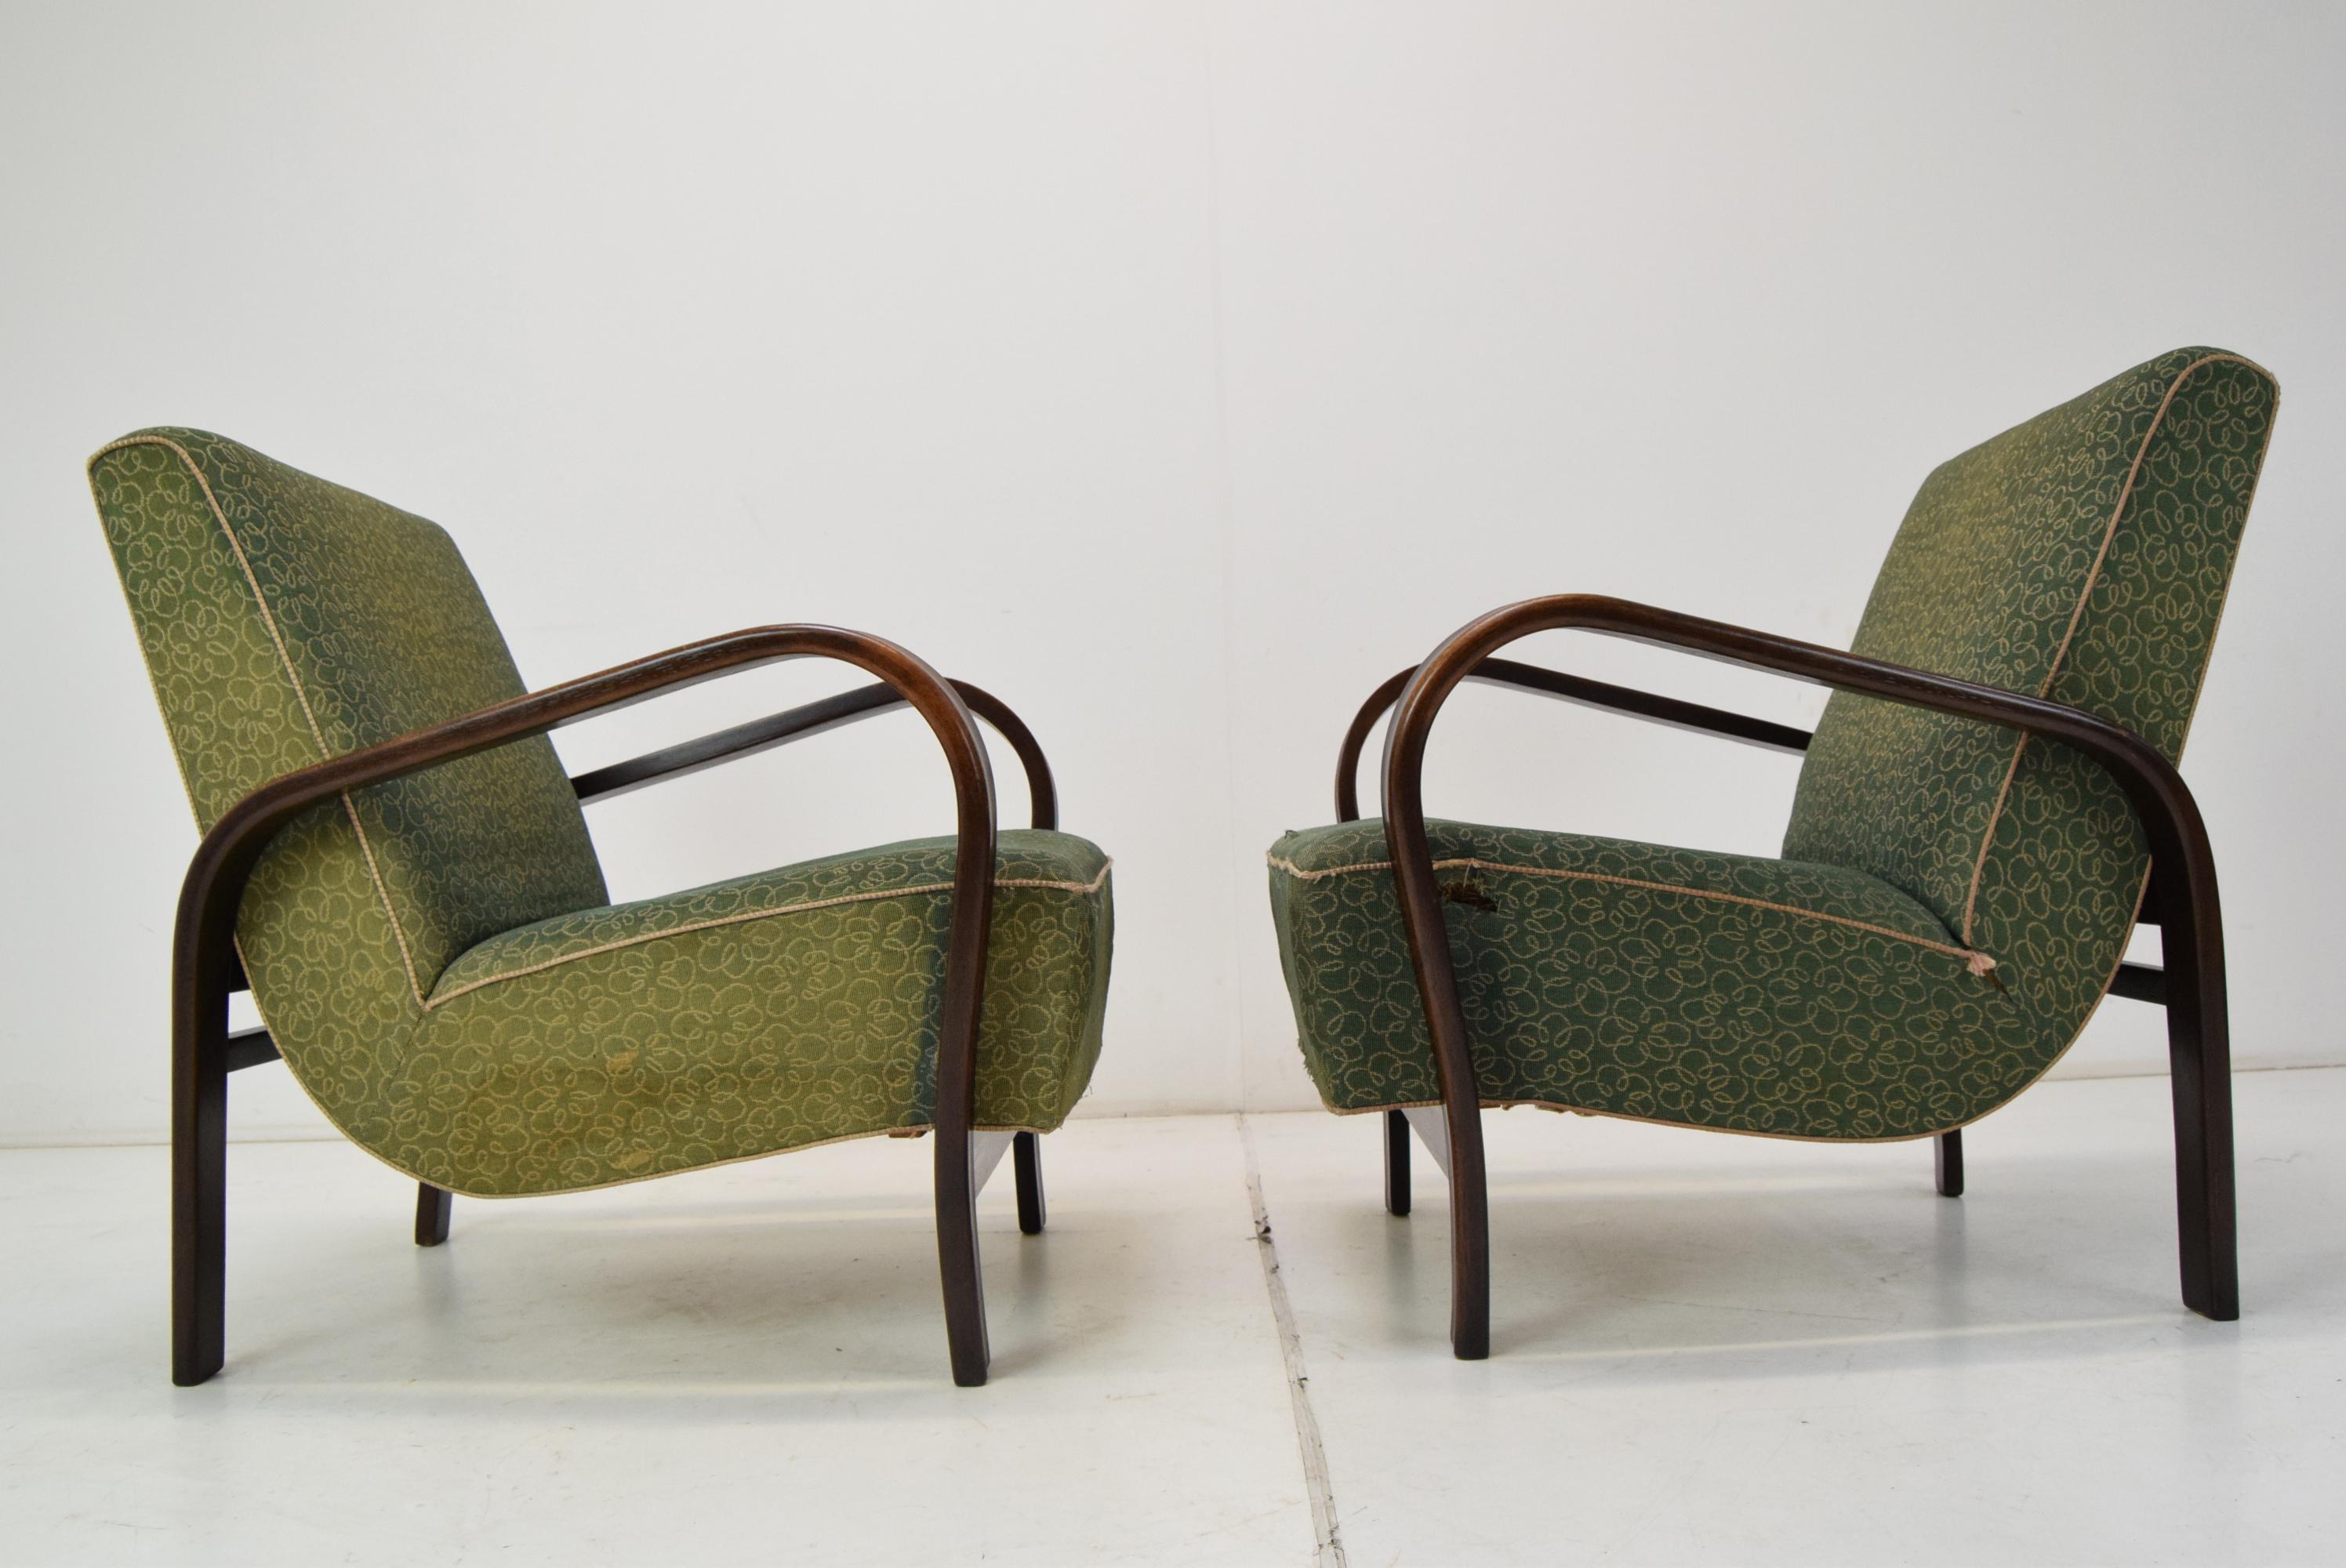 Fabric Pair of Art Deco Armchairs by Kropacek and Kozelka, 1930's.